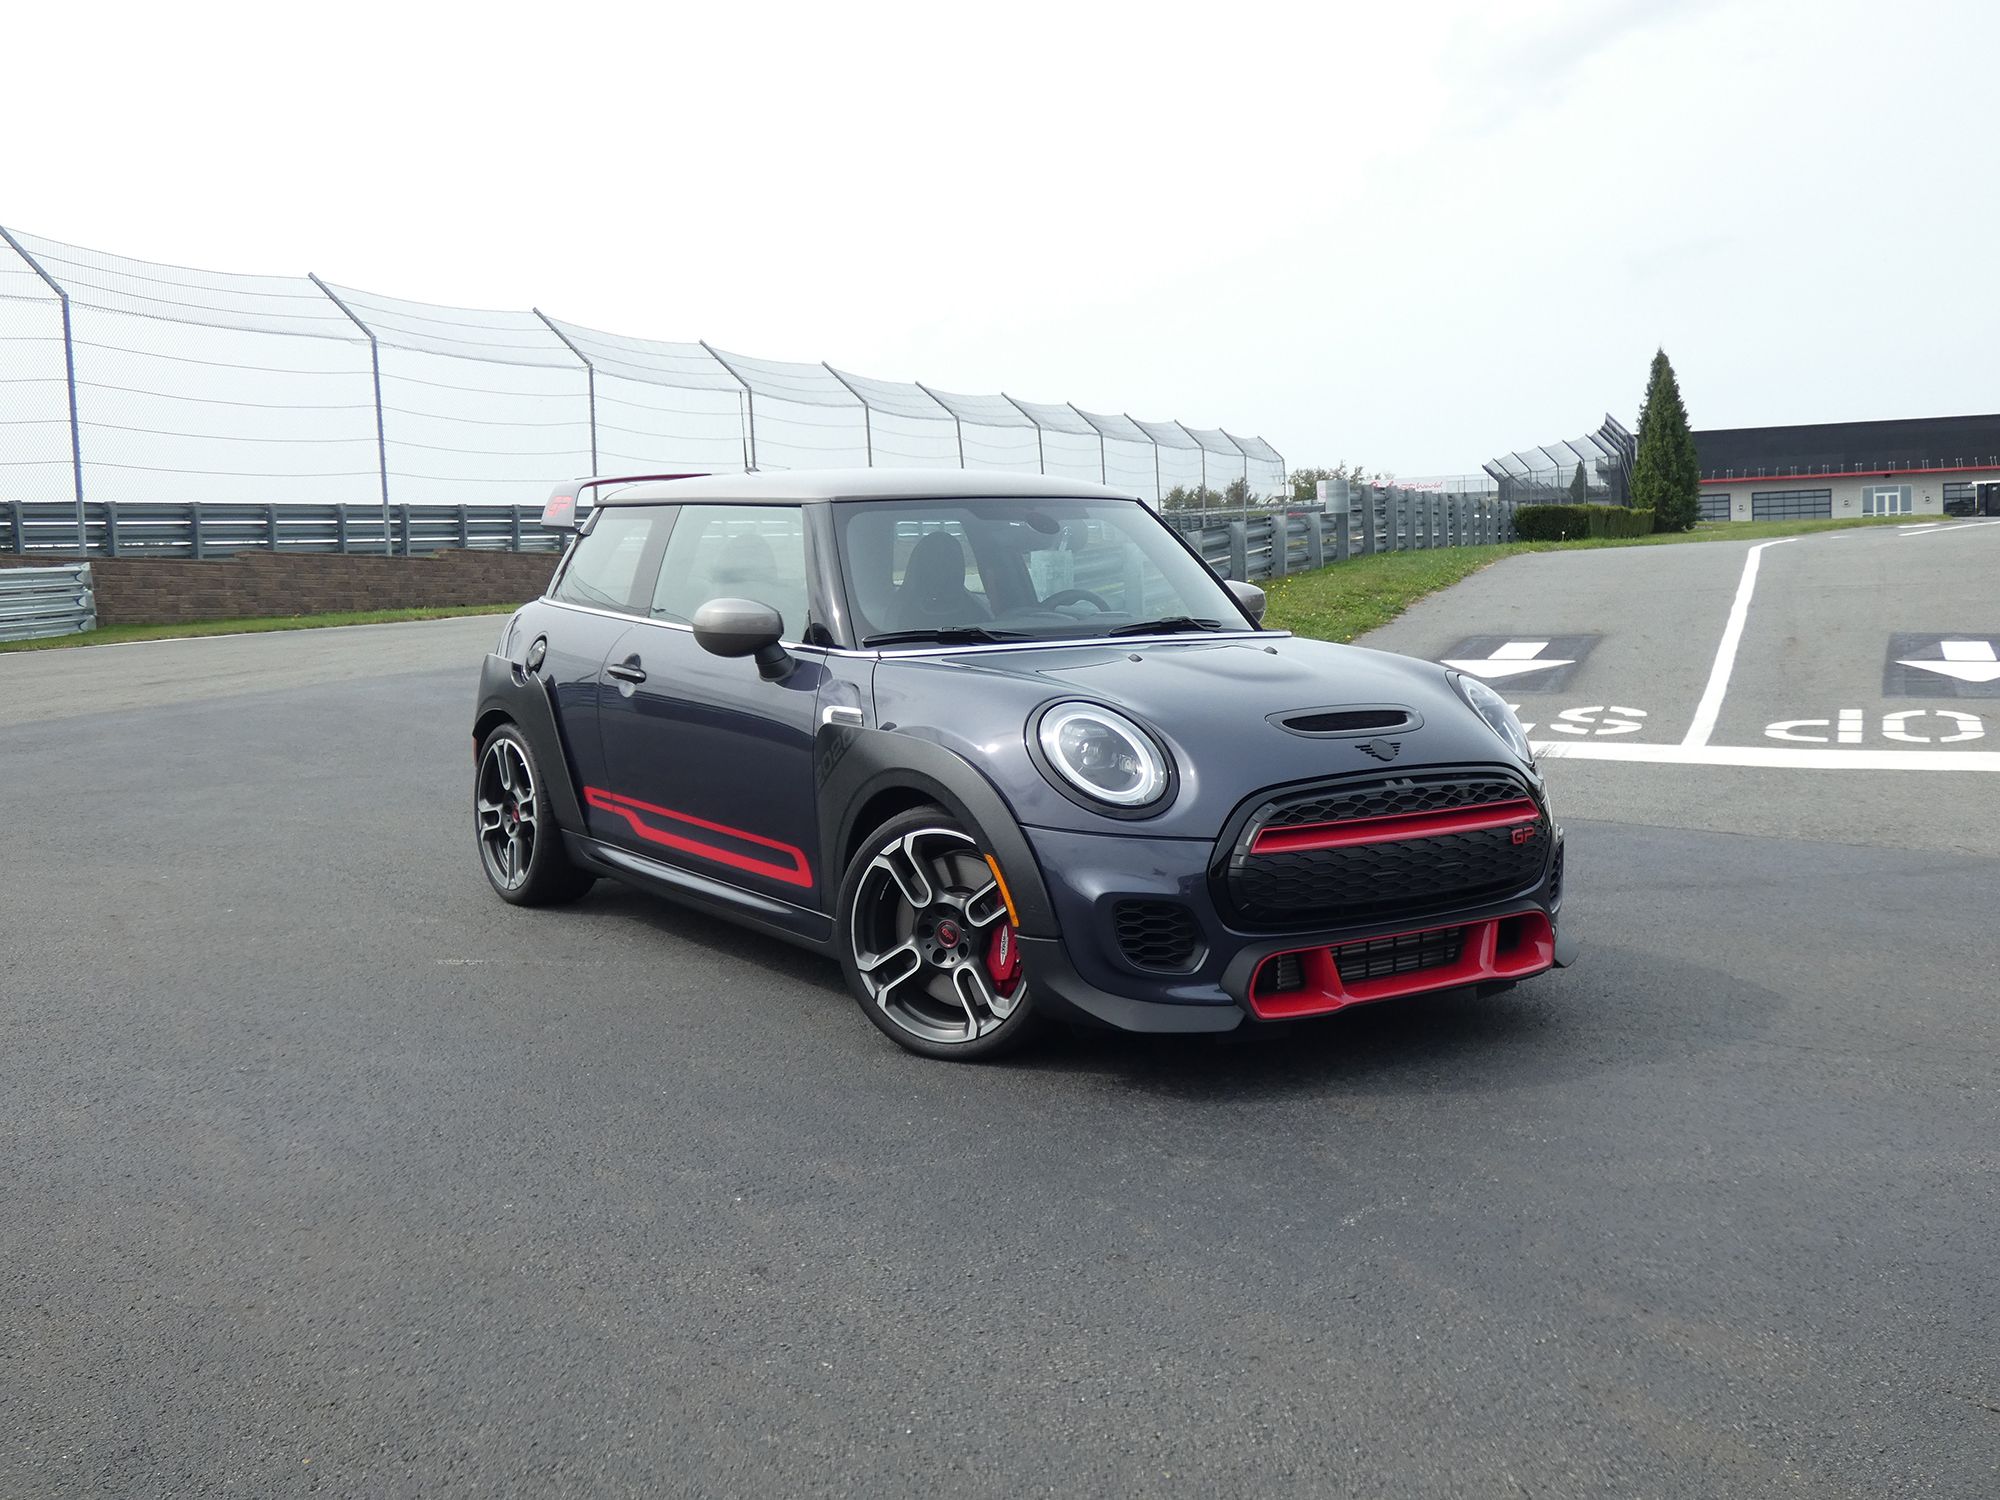 The new Mini Cooper JCW GP is quirky and quick, but not worth the cost